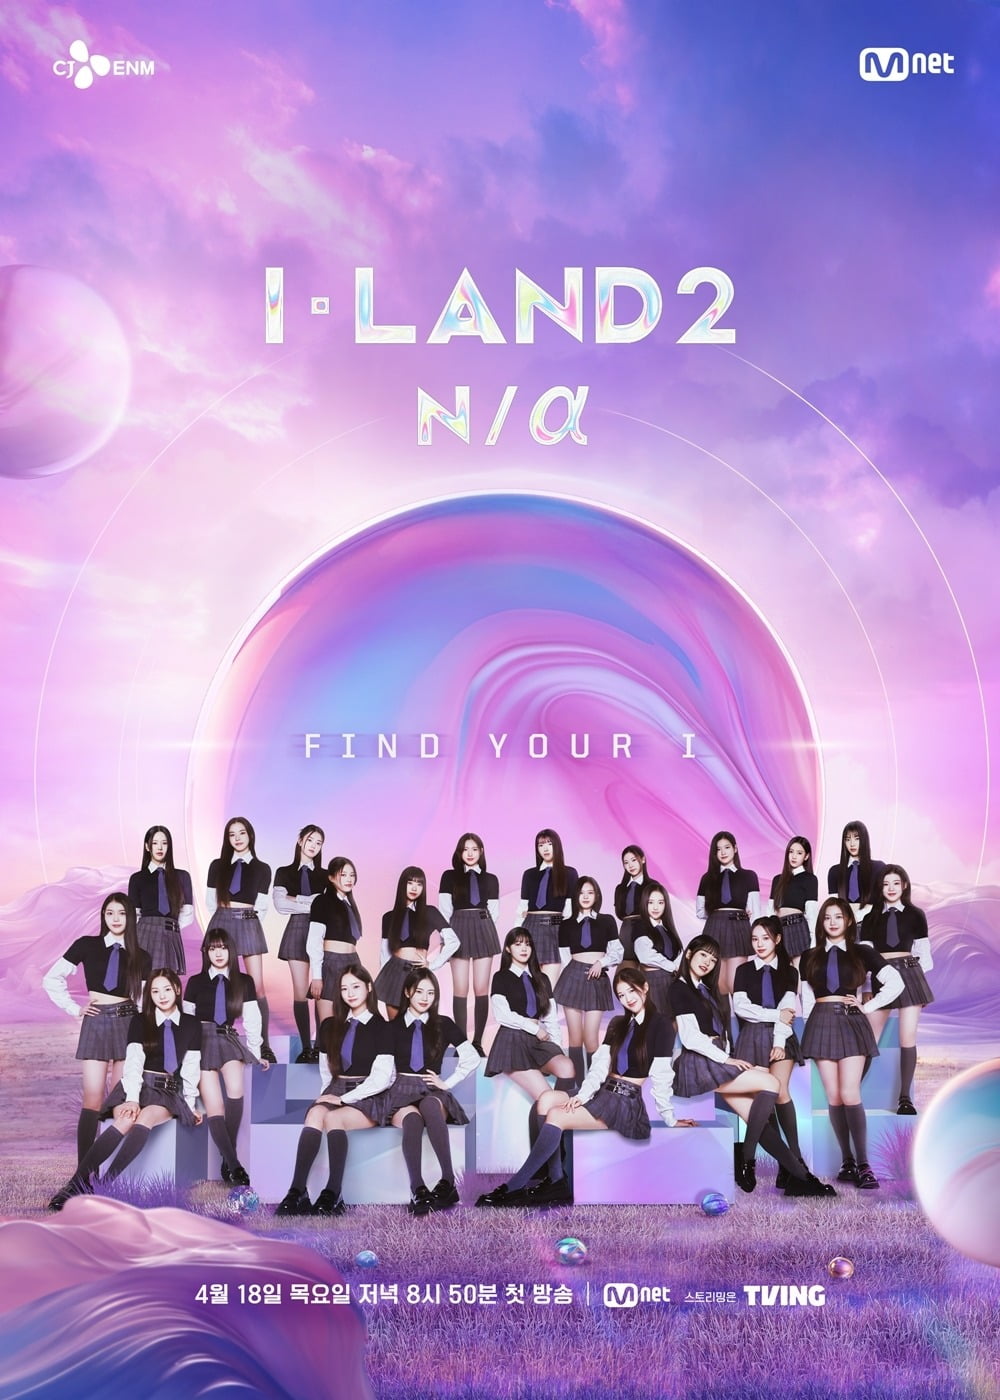 “Island 2: N/a” – The Birth of a New Girl Group